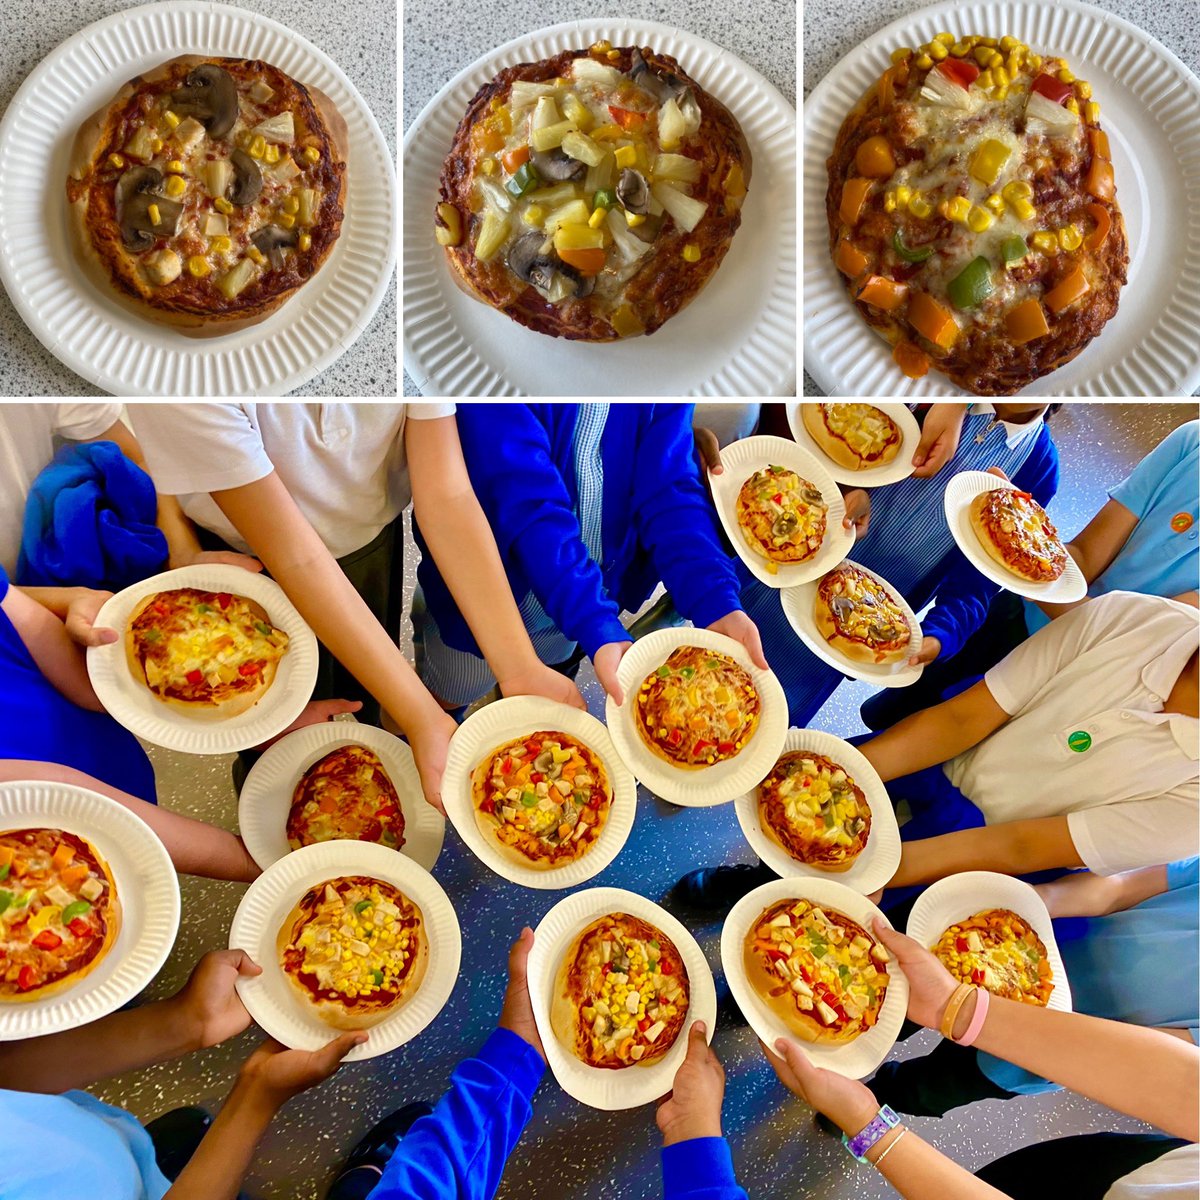 WOW! WOW! WOW! Fabulous pizza making skills! year5 students from Glenbrook joined the DT team at @OfficialNUSA today, there’s a few chefs in the making #amazingnusa #eatarainbow